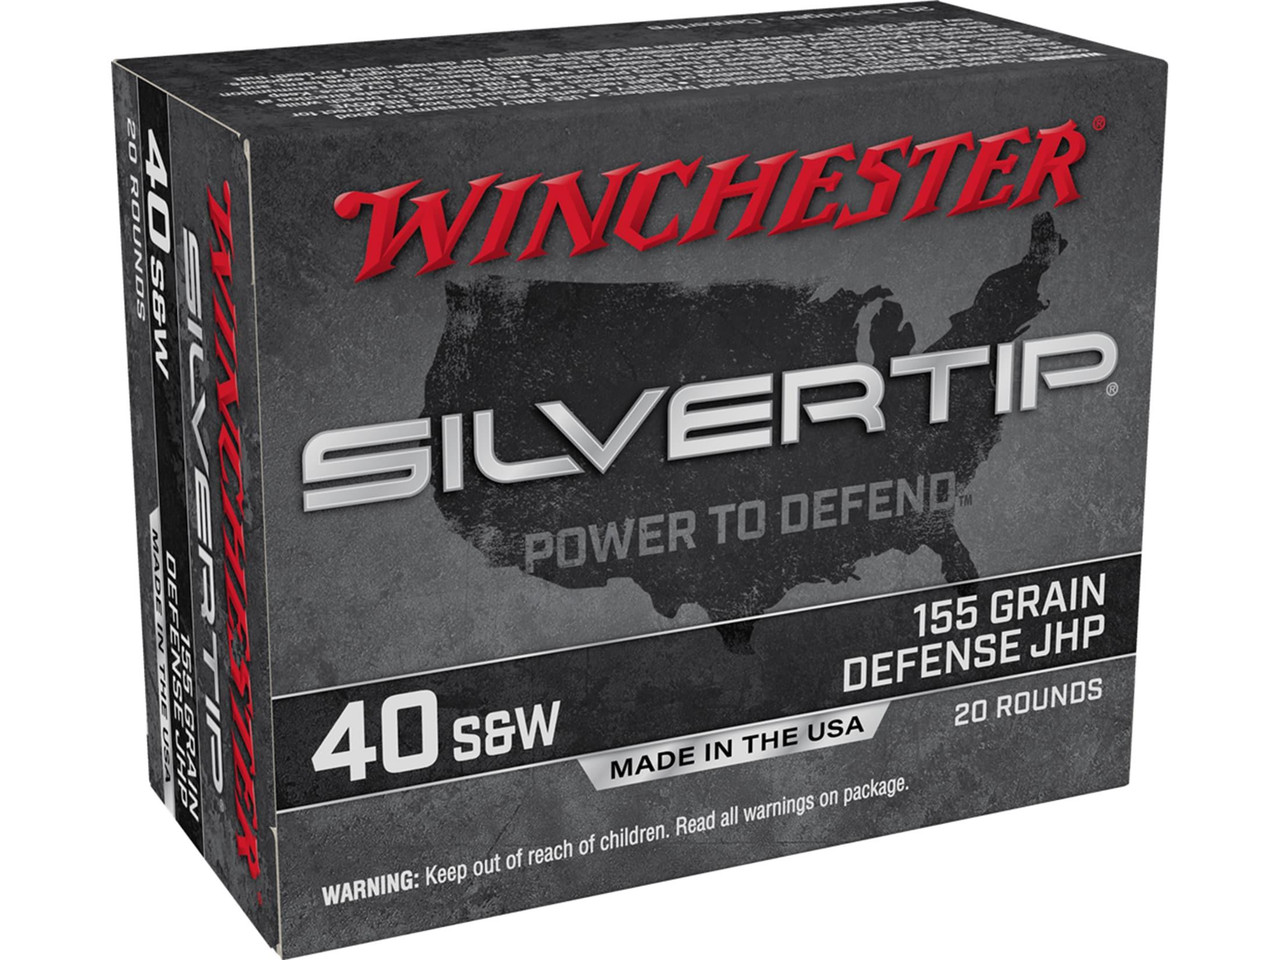 Winchester Silvertip Defense Ammunition 40 S&W 155 Grain Jacketed Hollow Point Box of 20